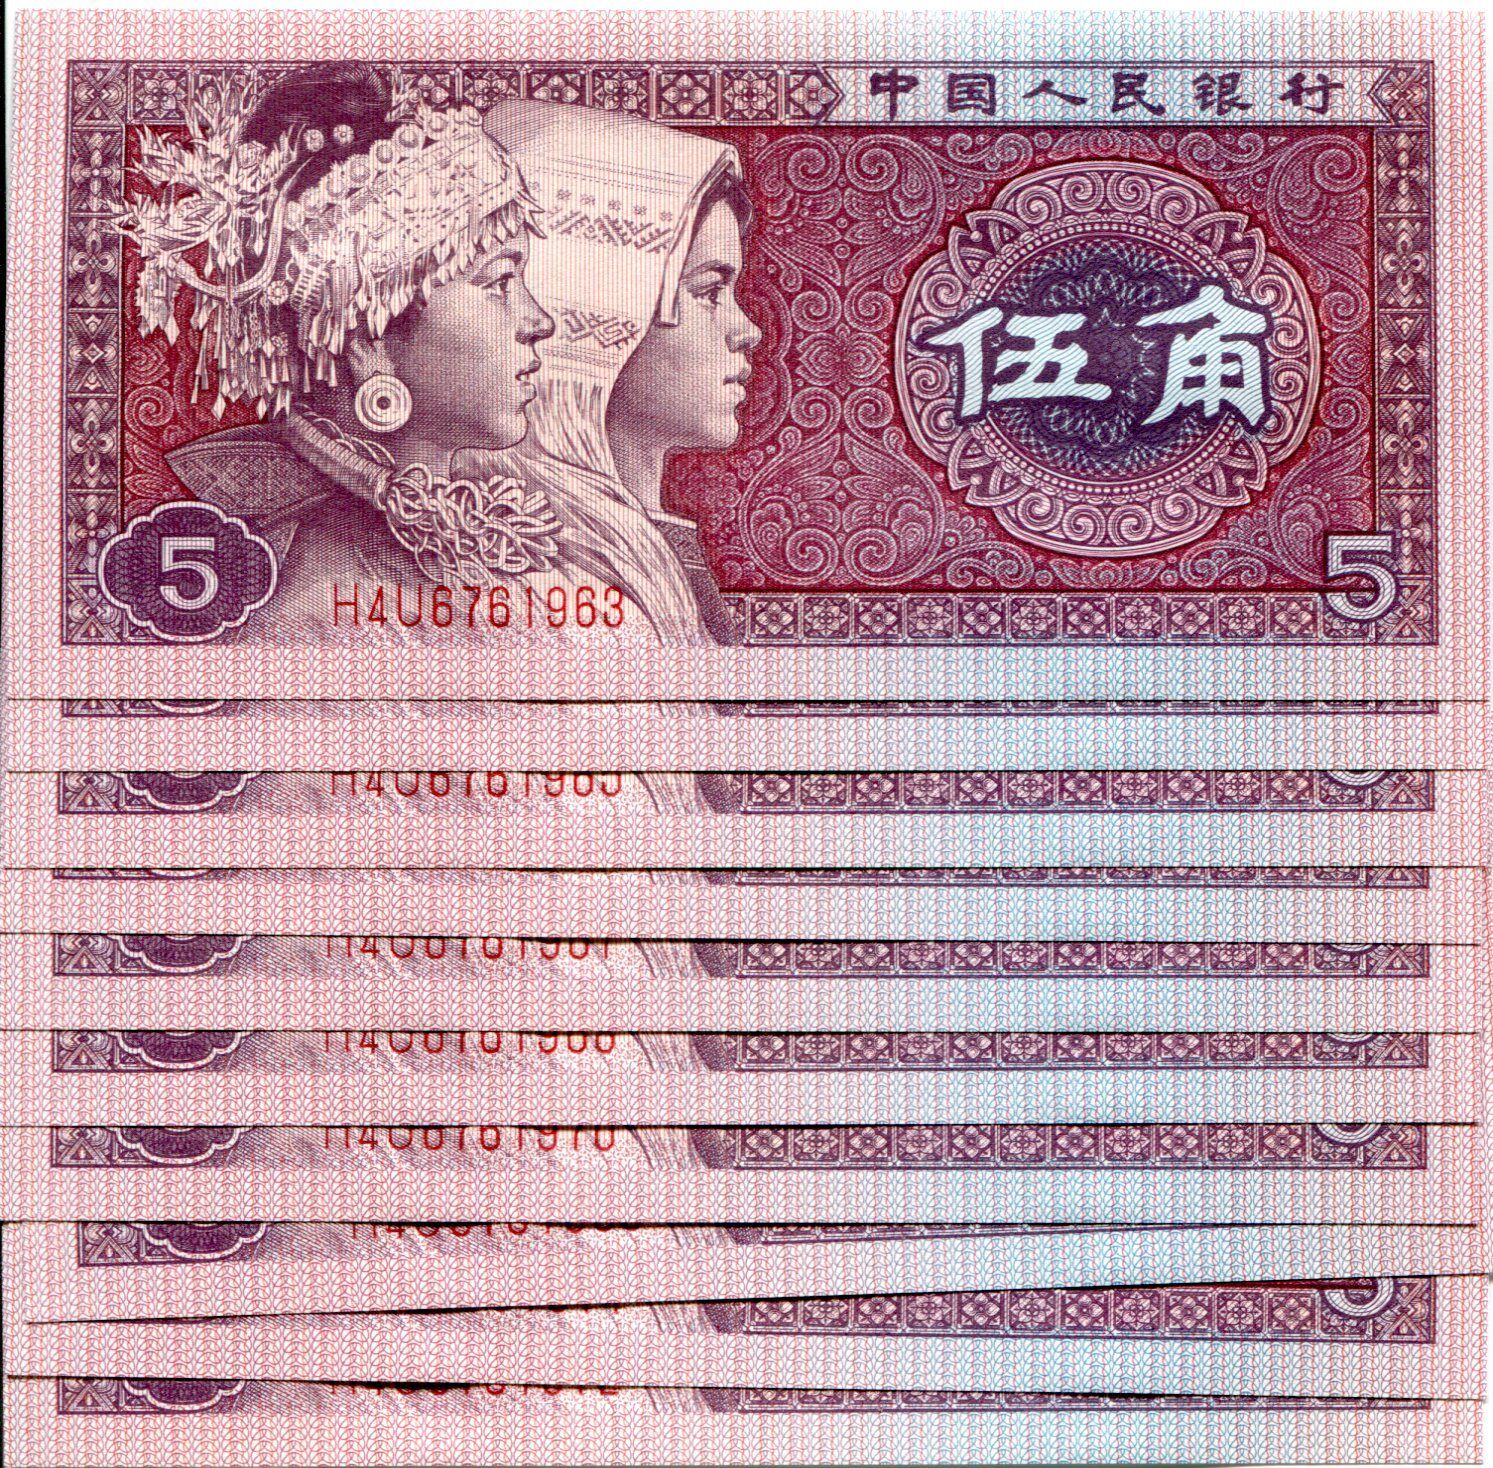 Banknote China Chinese PRC 5 Jiao 1980 Communist Currency UNC x 10 pcs Lot